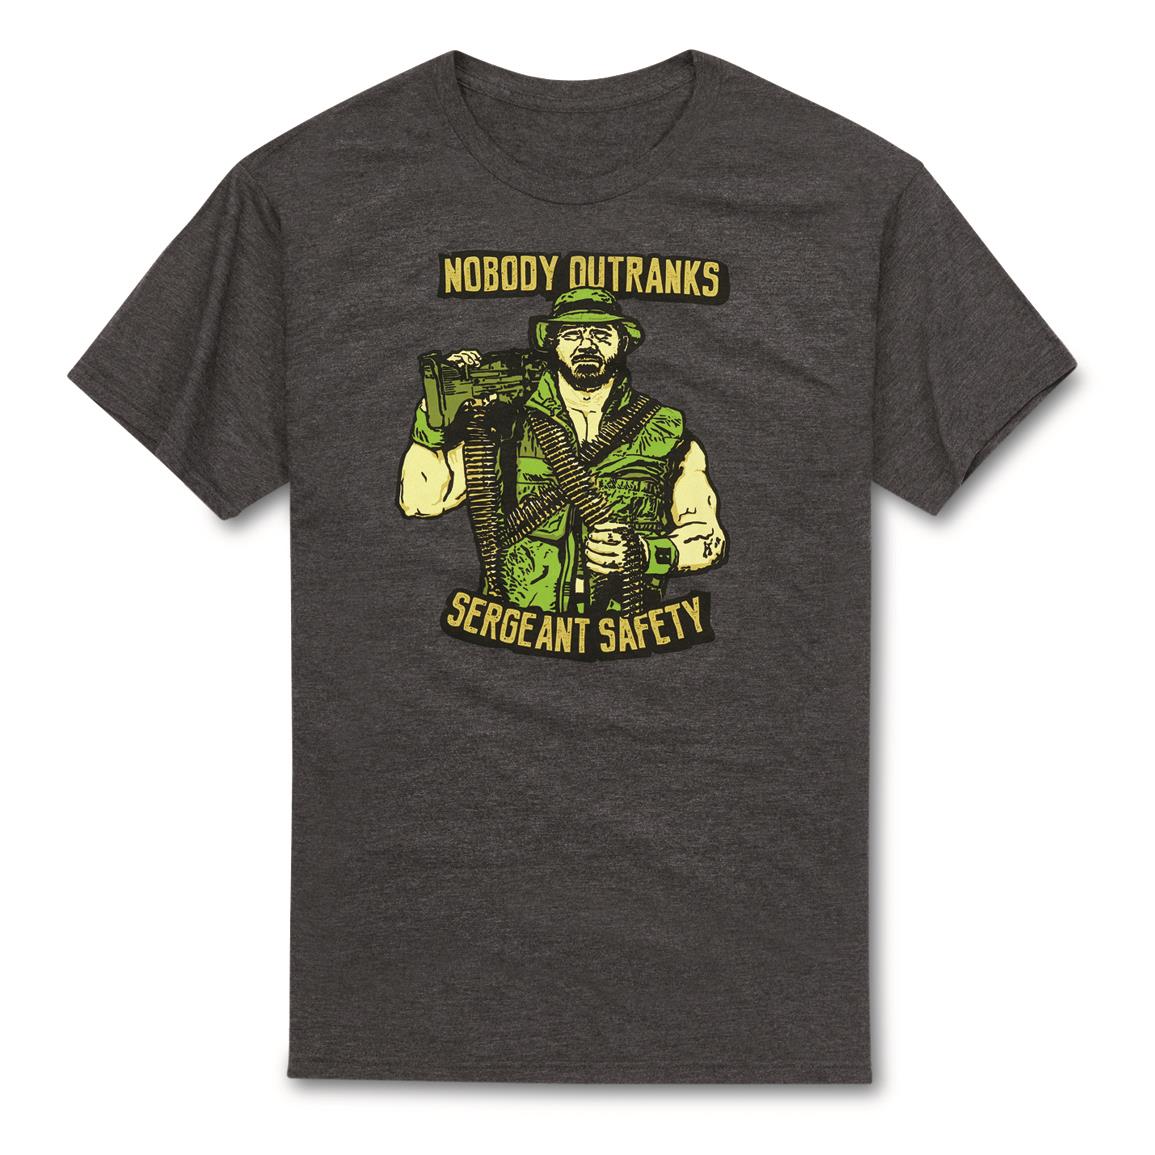 Viktos Sgt Safety T-Shirt, Charcoal Heather